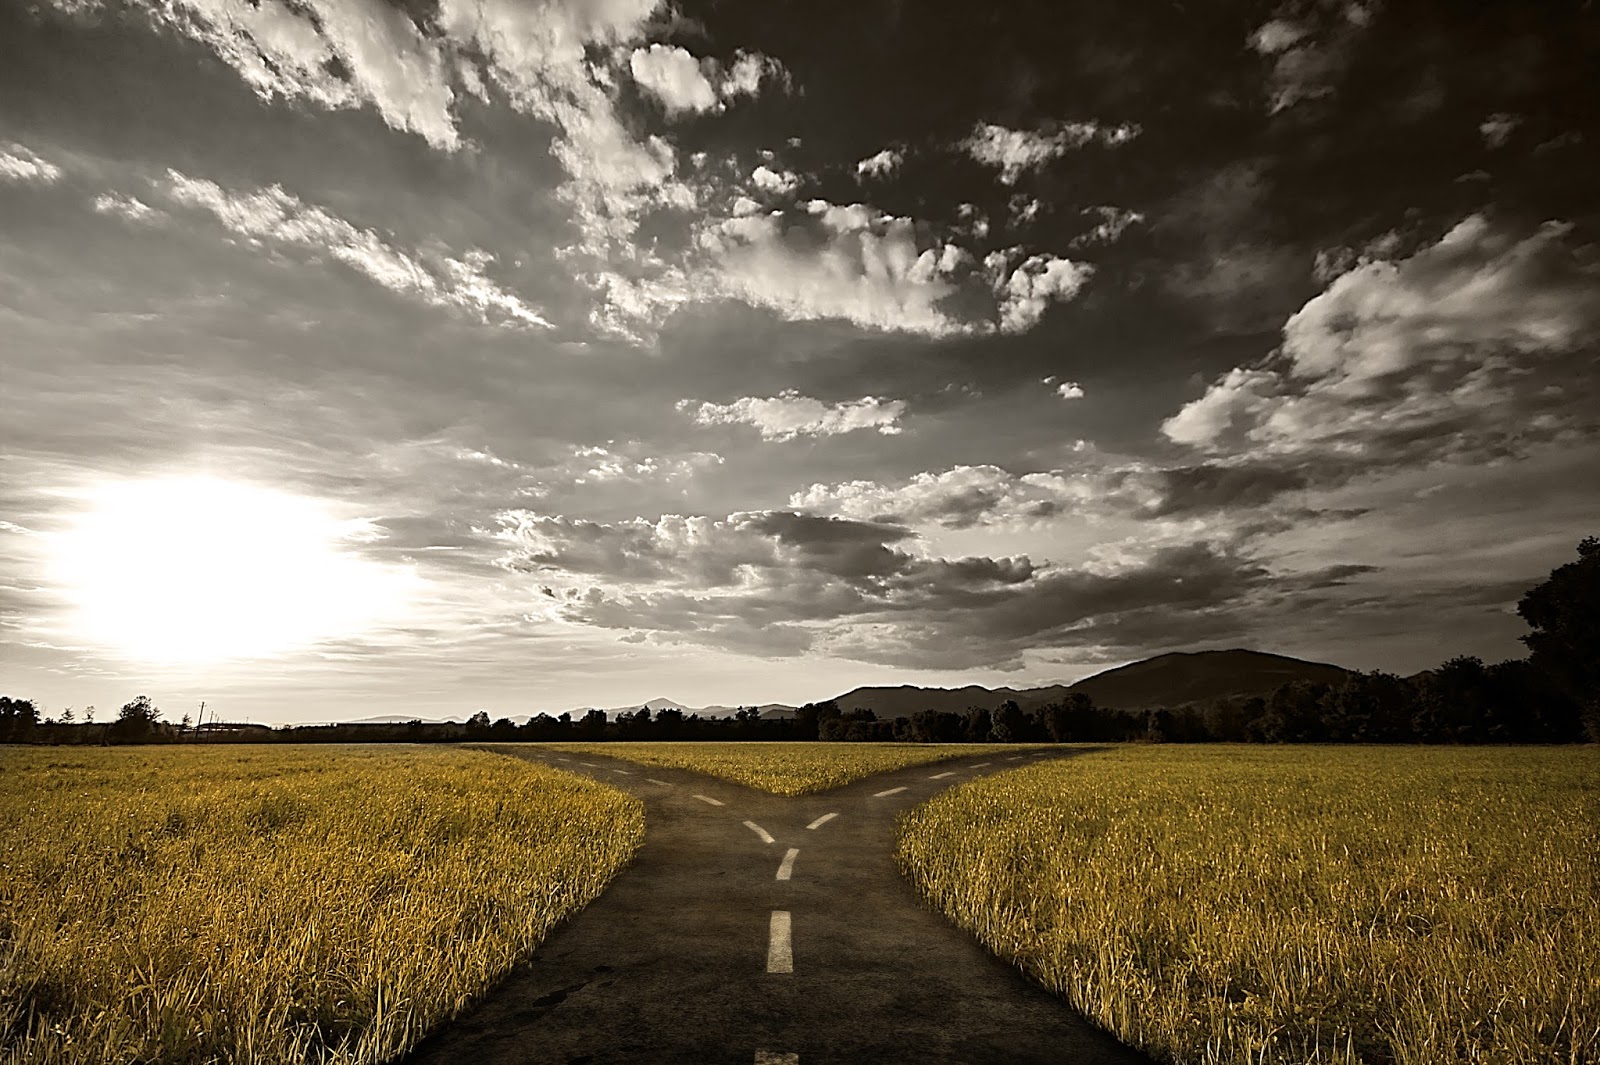 An image of a cloudy rural landscape in the morning, with the sun lighting over a single road that diverges into two paths.